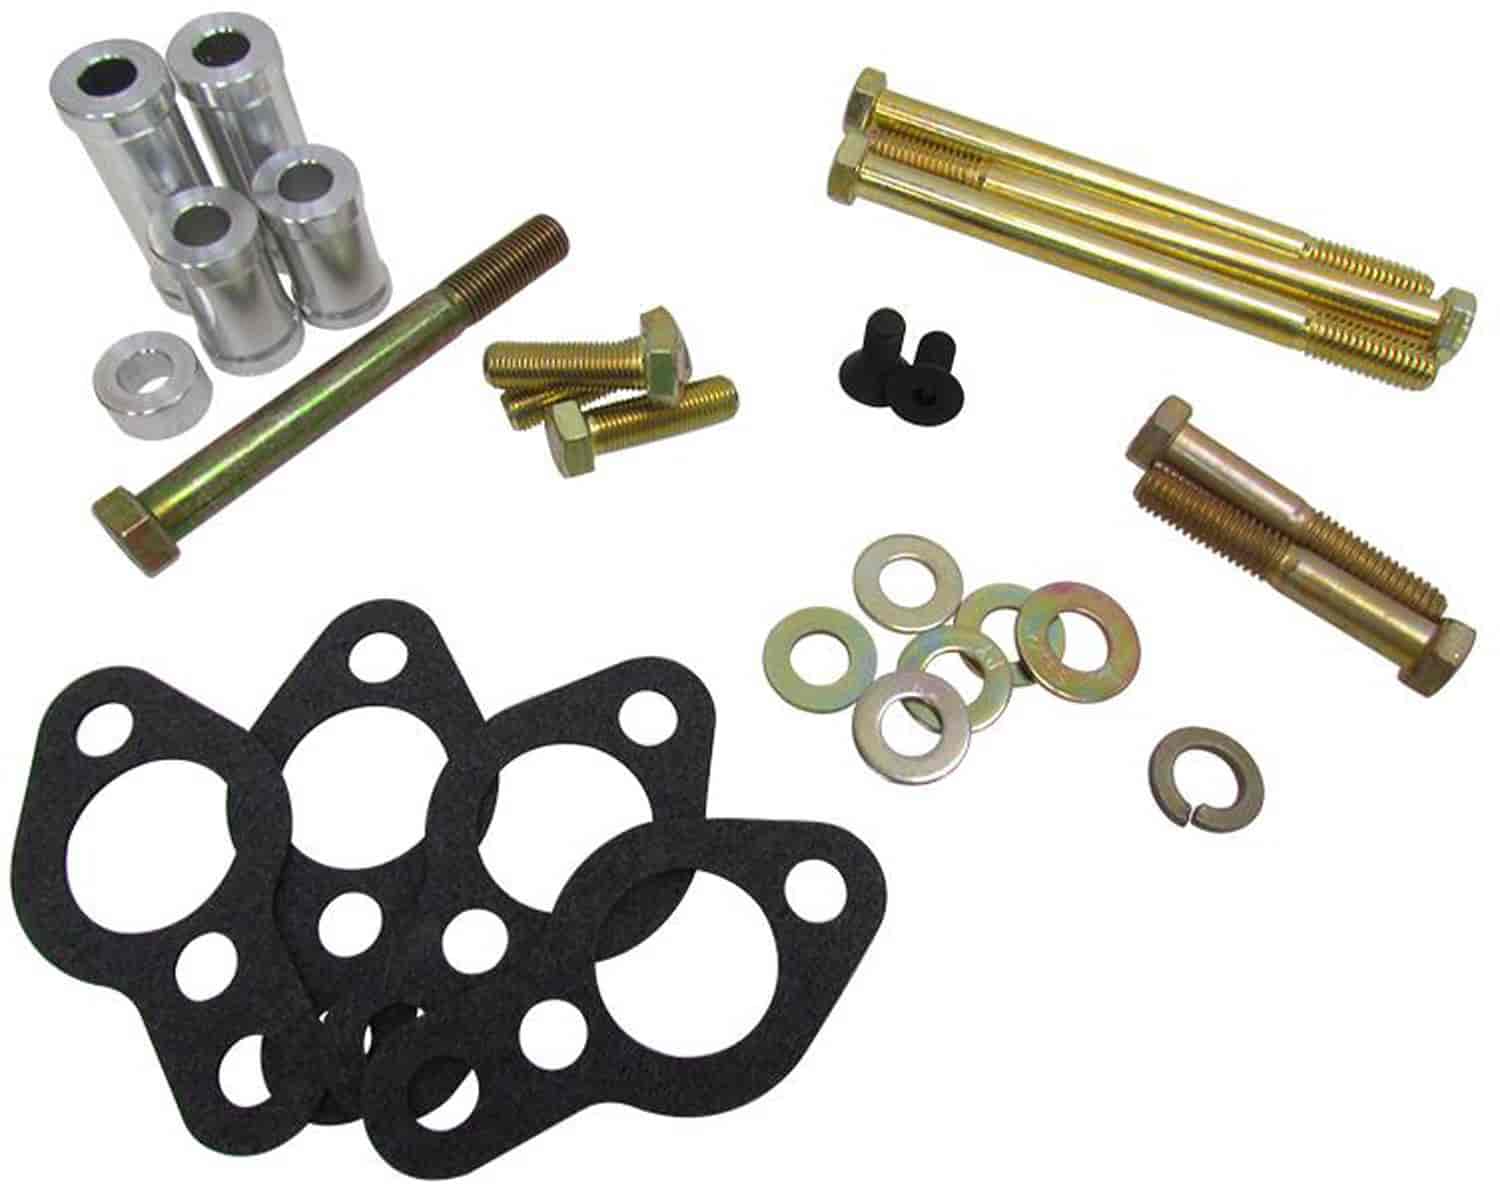 HARDWARE KIT FOR WATER PUMP ONLY DRIVE KITS W/ BELLHOUSING STEERING PUMP